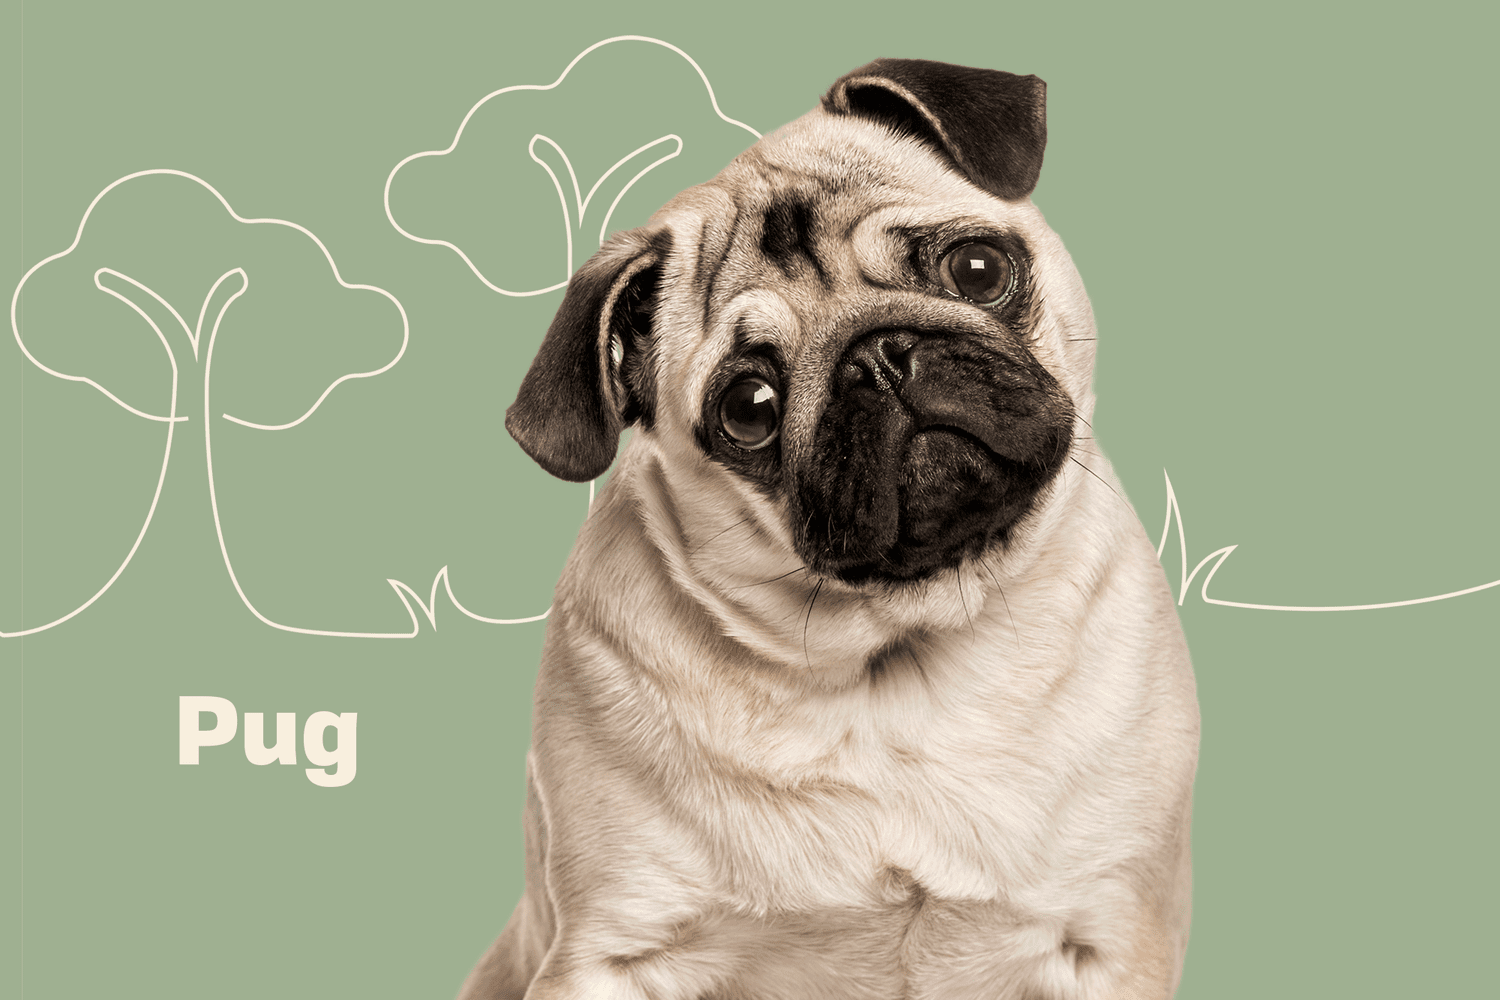 Pug Dog Breeds: Characteristics, Temperament, 3 Facts About Health & Take Care